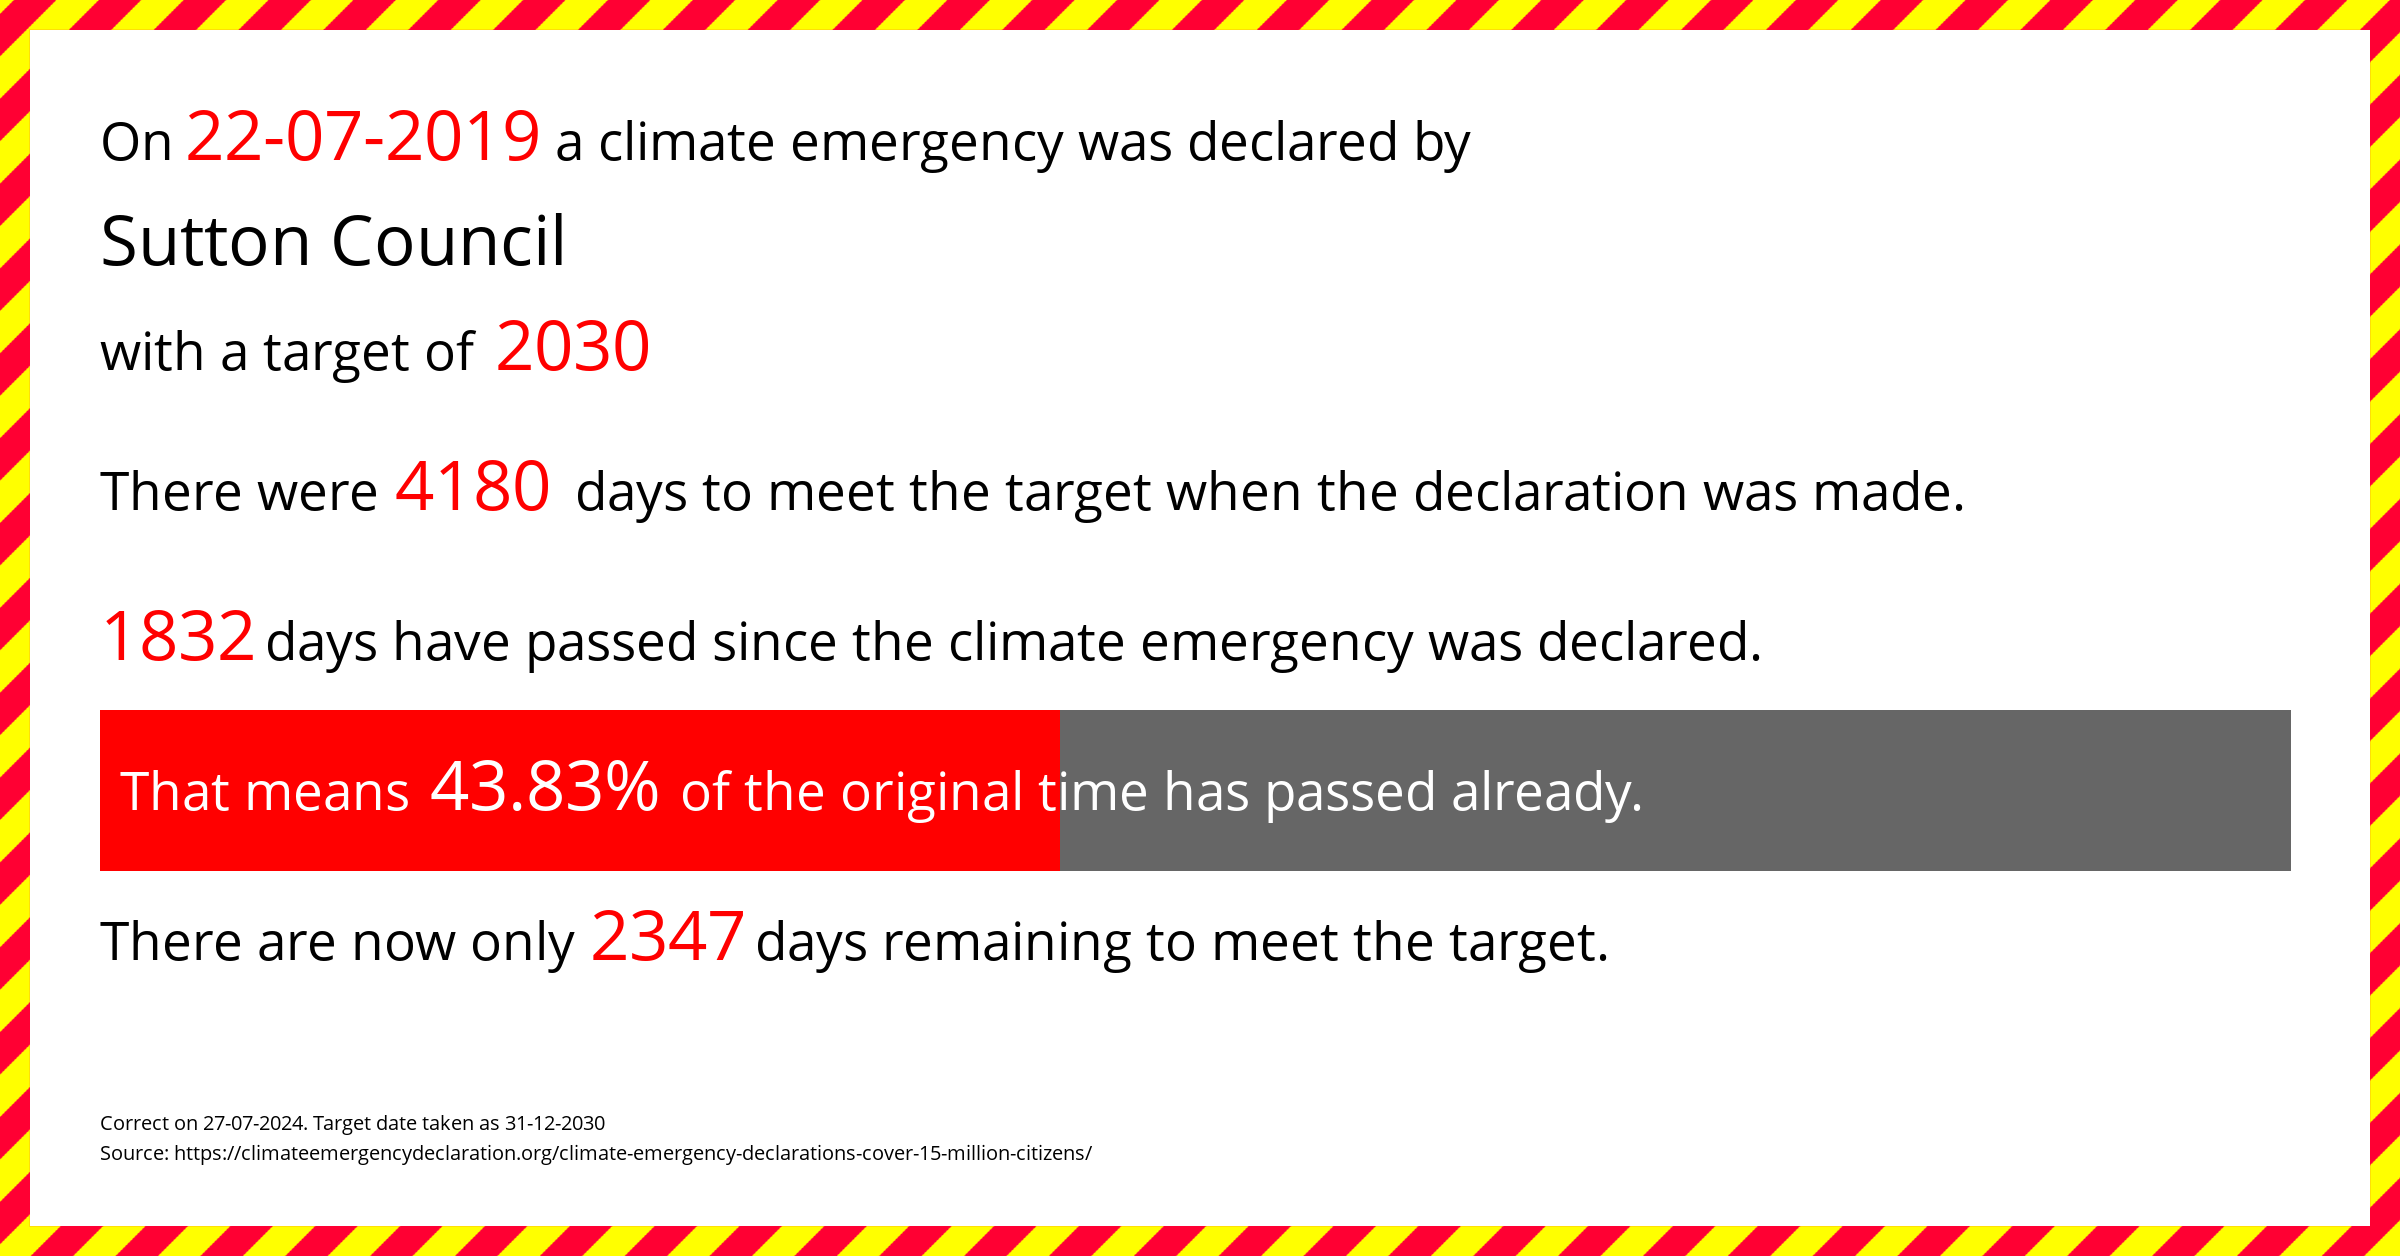 Sutton Council declared a Climate emergency on Monday 22nd July 2019, with a target of 2030.